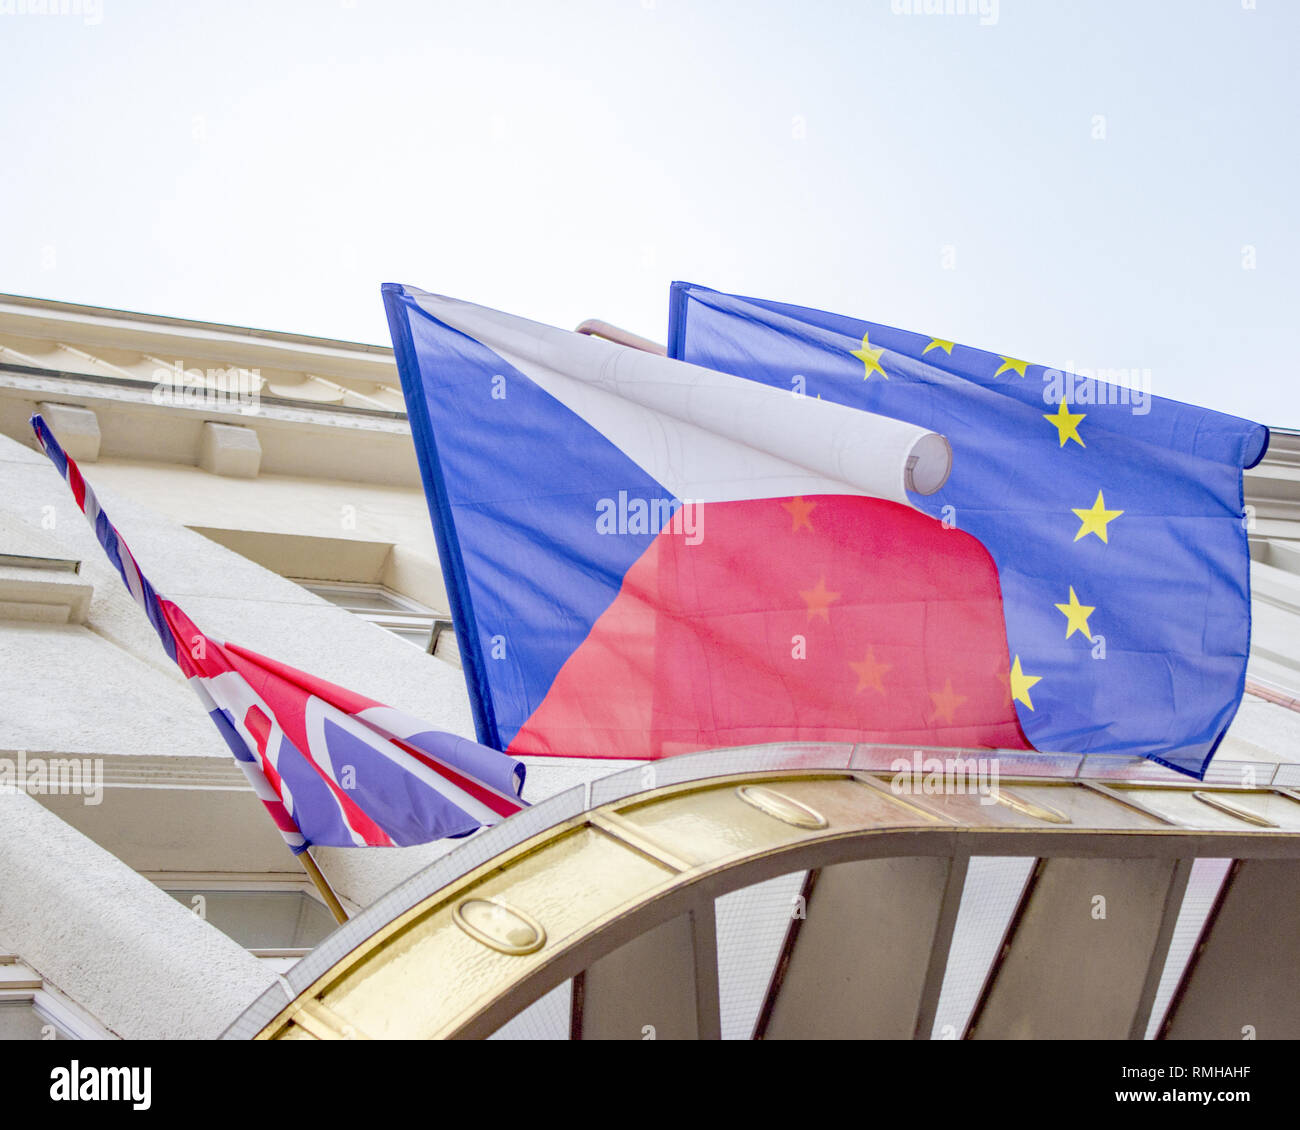 The English, Czech and European flags blowing in the wind Stock Photo